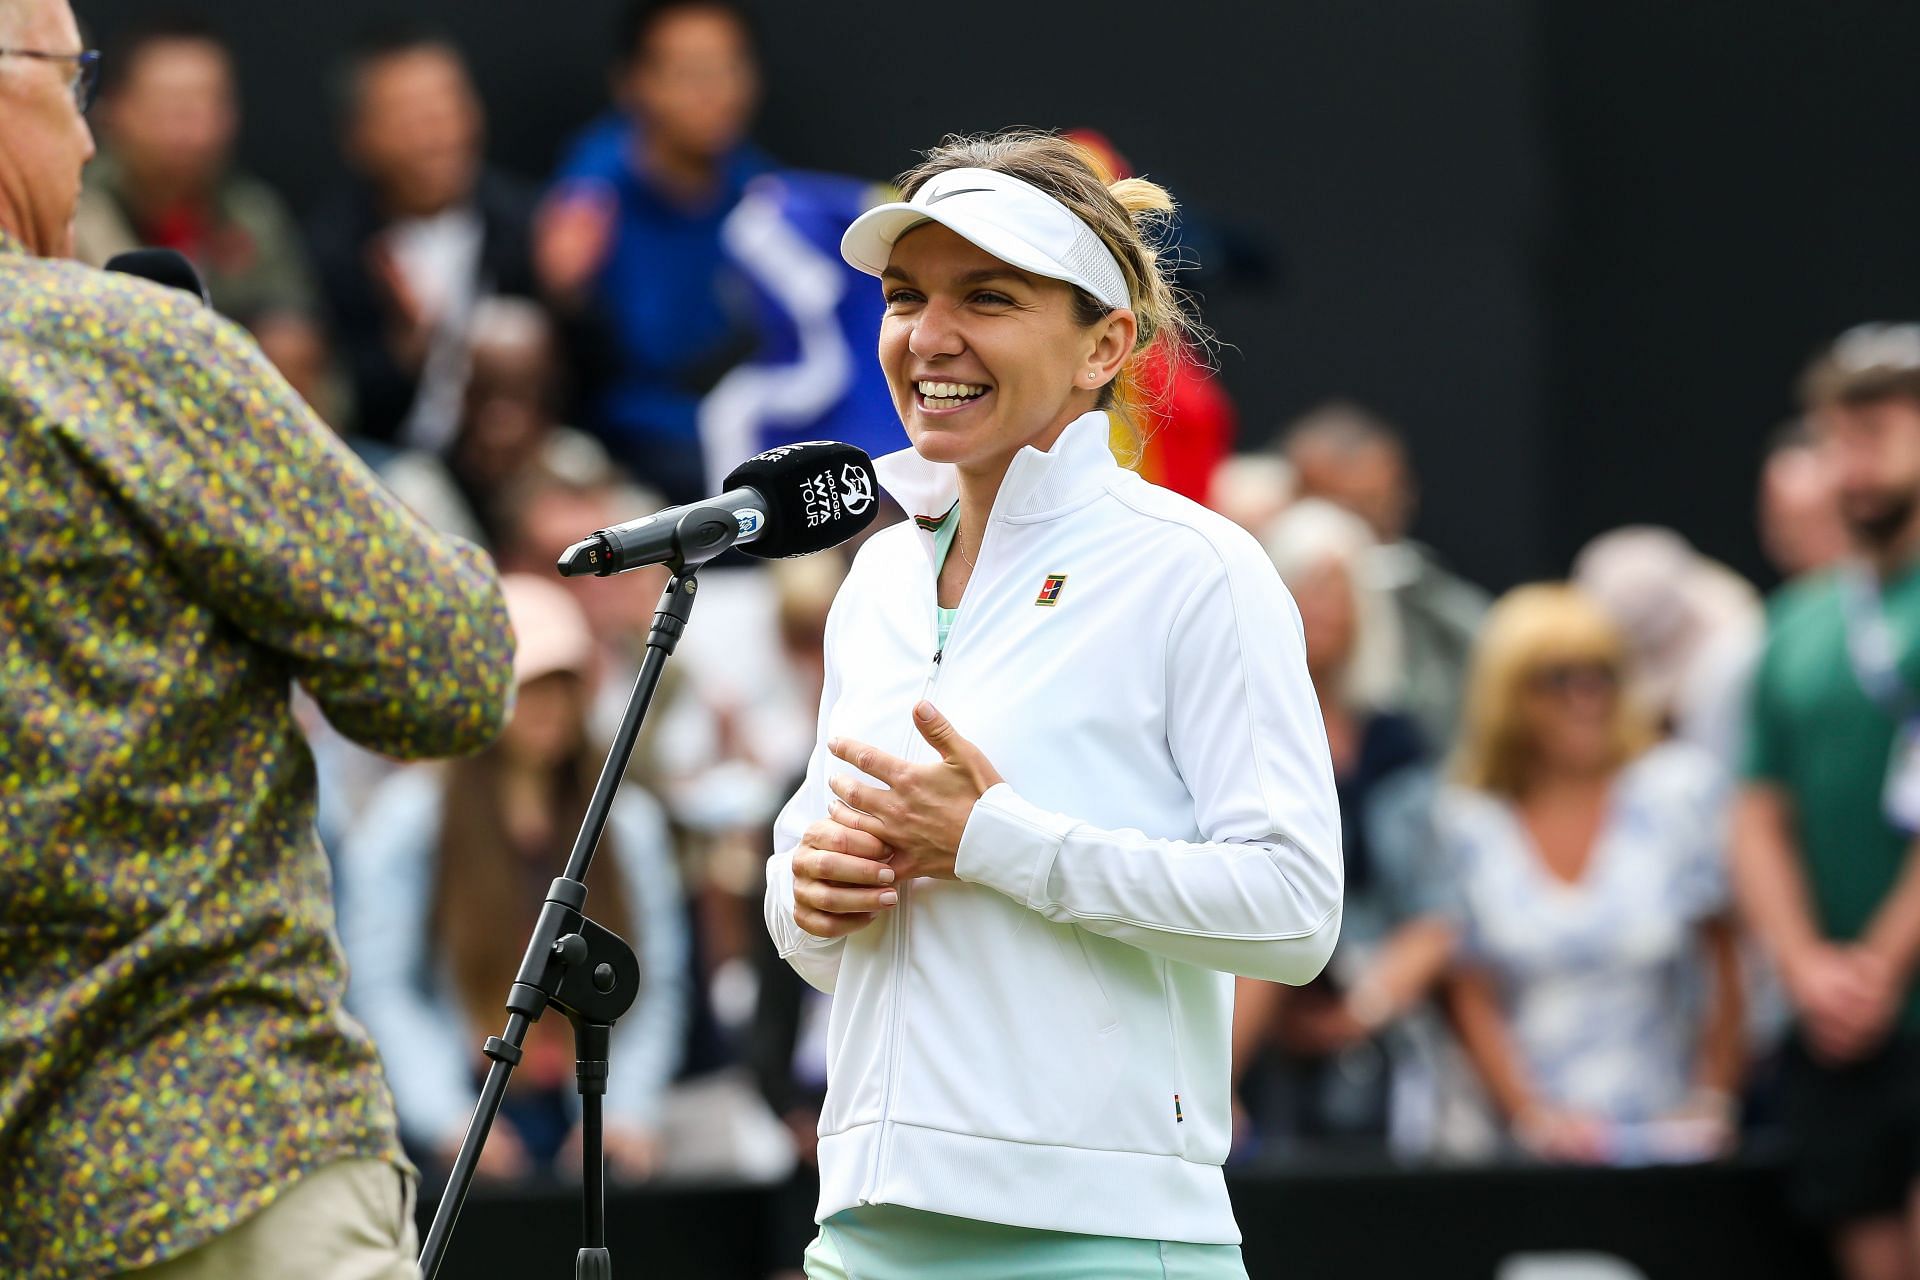 Simona Halep is set to make her debut at the Bad Homburg Open.